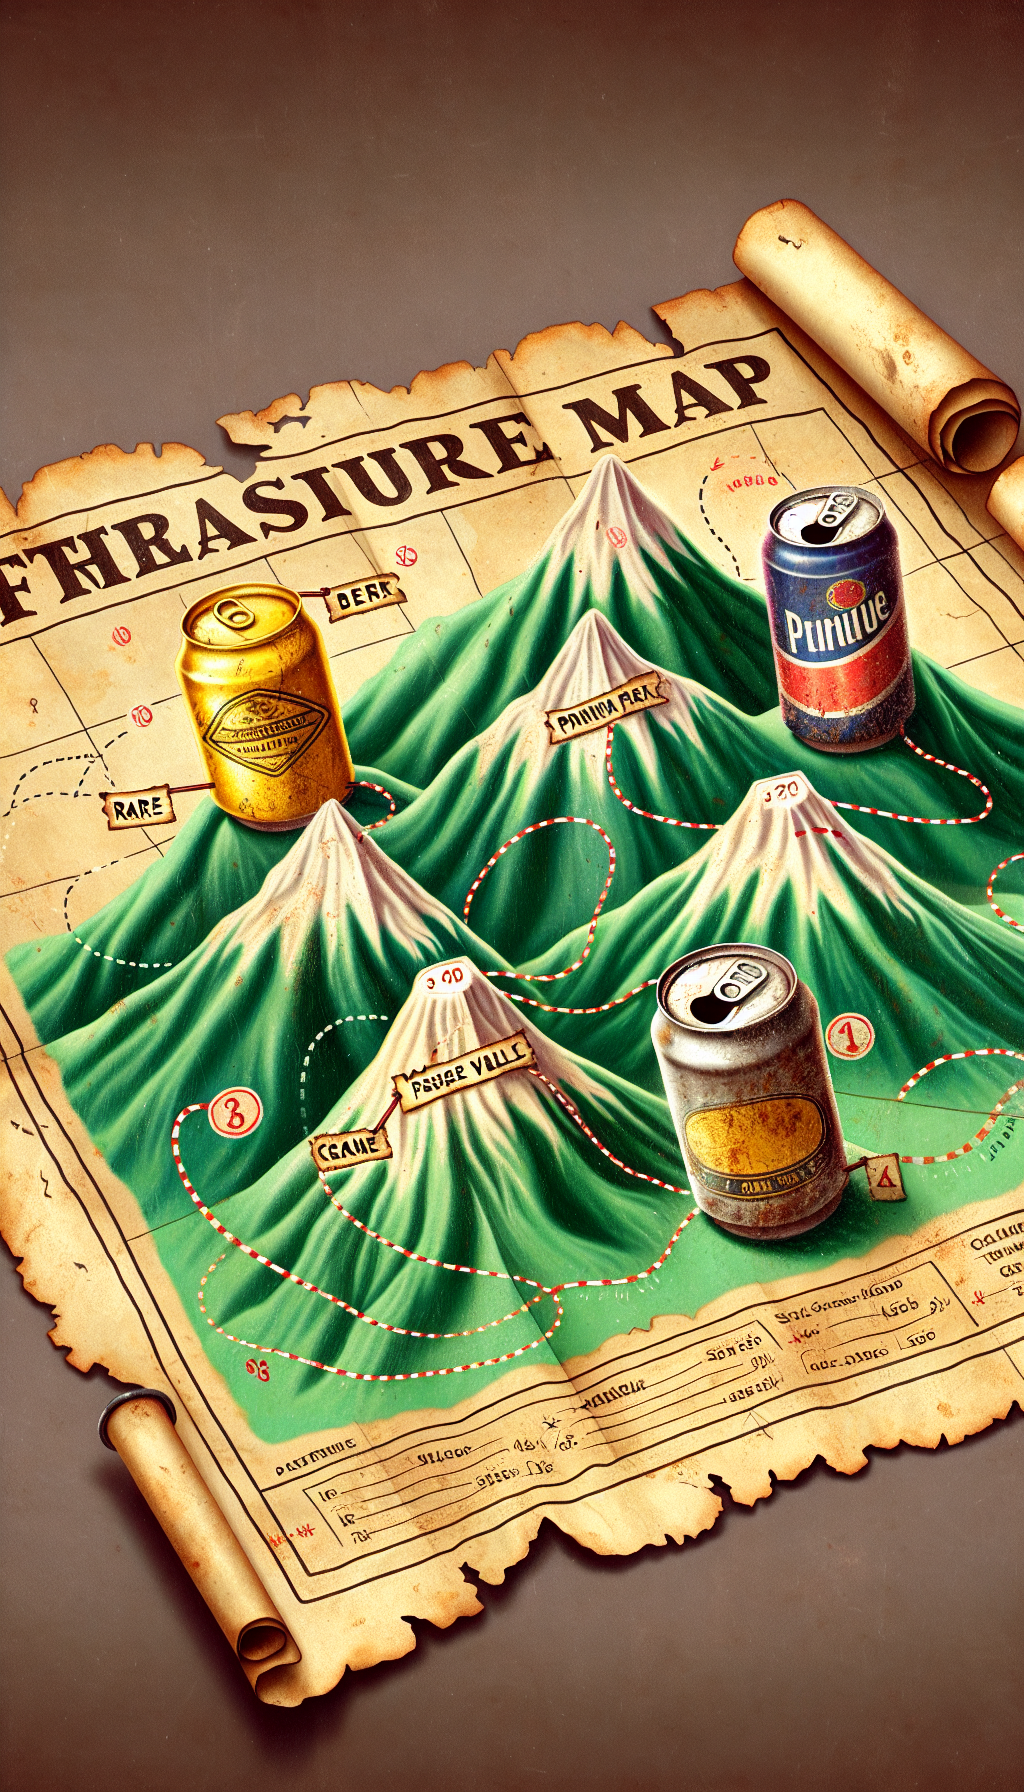 A whimsically detailed treasure map with aged parchment texture unfurls to reveal key landmarks: a gleaming gold beer can labeled 'Rare', a shiny, mint-condition can atop a 'Pristine Peak,' and an ancient, rusted can resting at 'Vintage Valley.' Each landmark is connected by dashed lines and monetary symbols, suggesting a valuation quest for old beer can collectors.